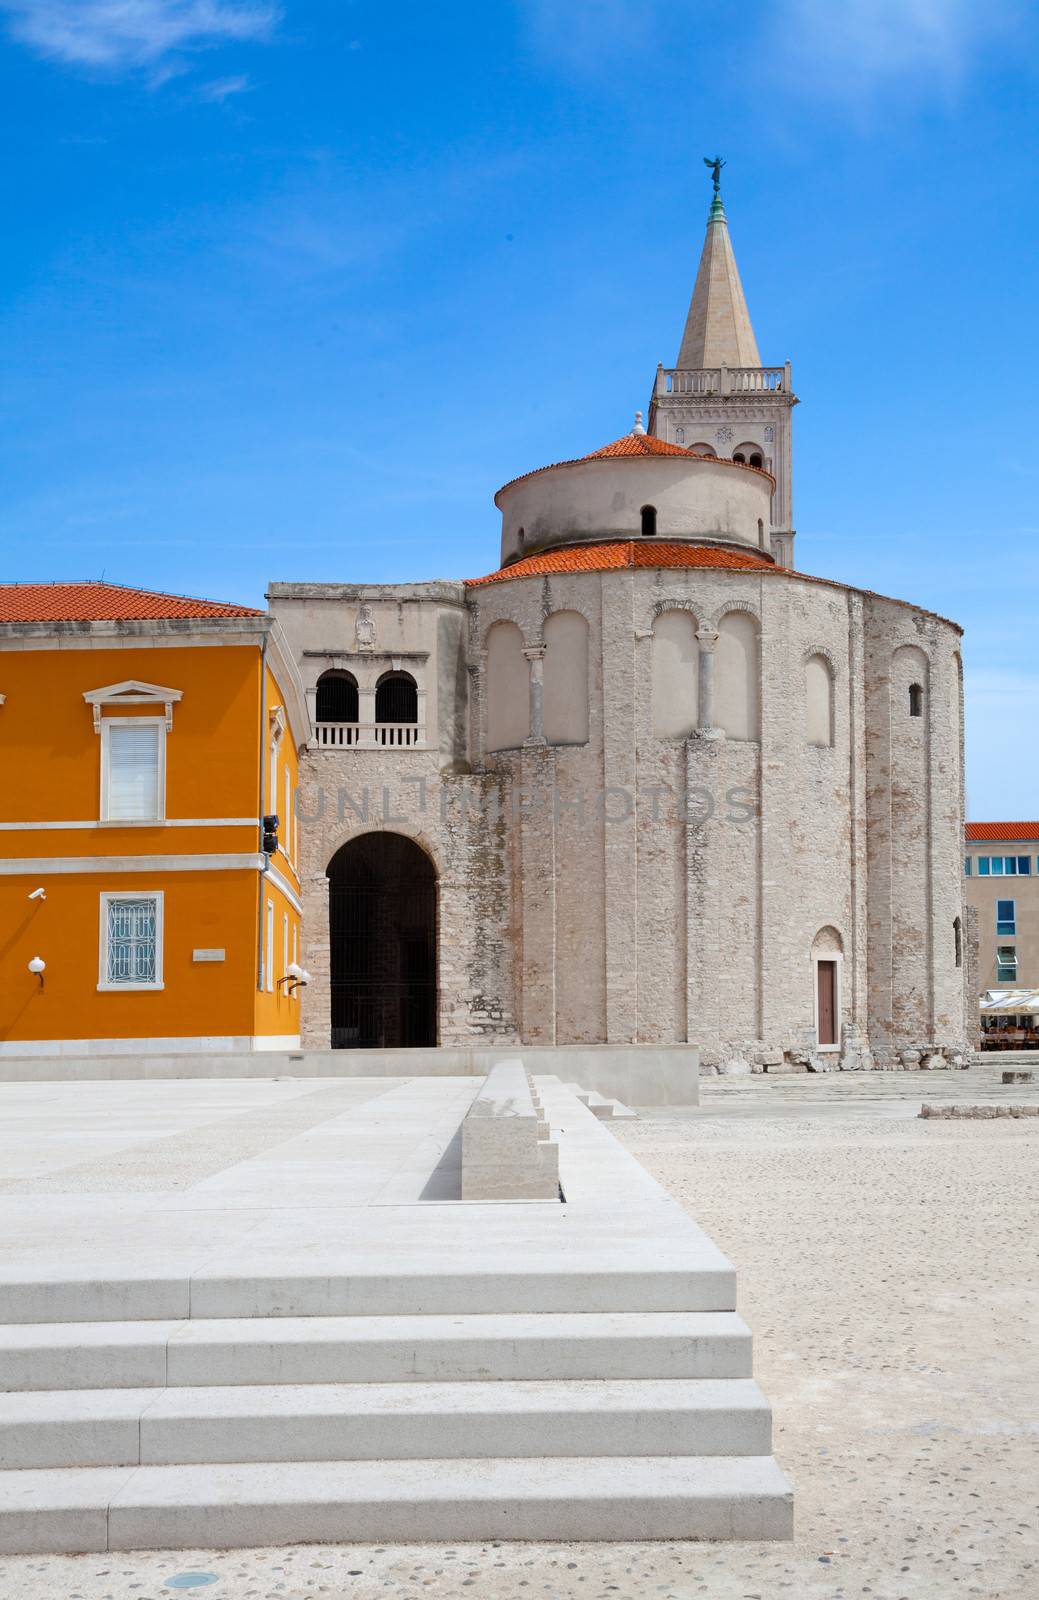 Church of Saint Donatus, romanesque  building from the 9th century in Zadar, Croatia. most impressive churches of centralised type of the Carolingian period in Europe.